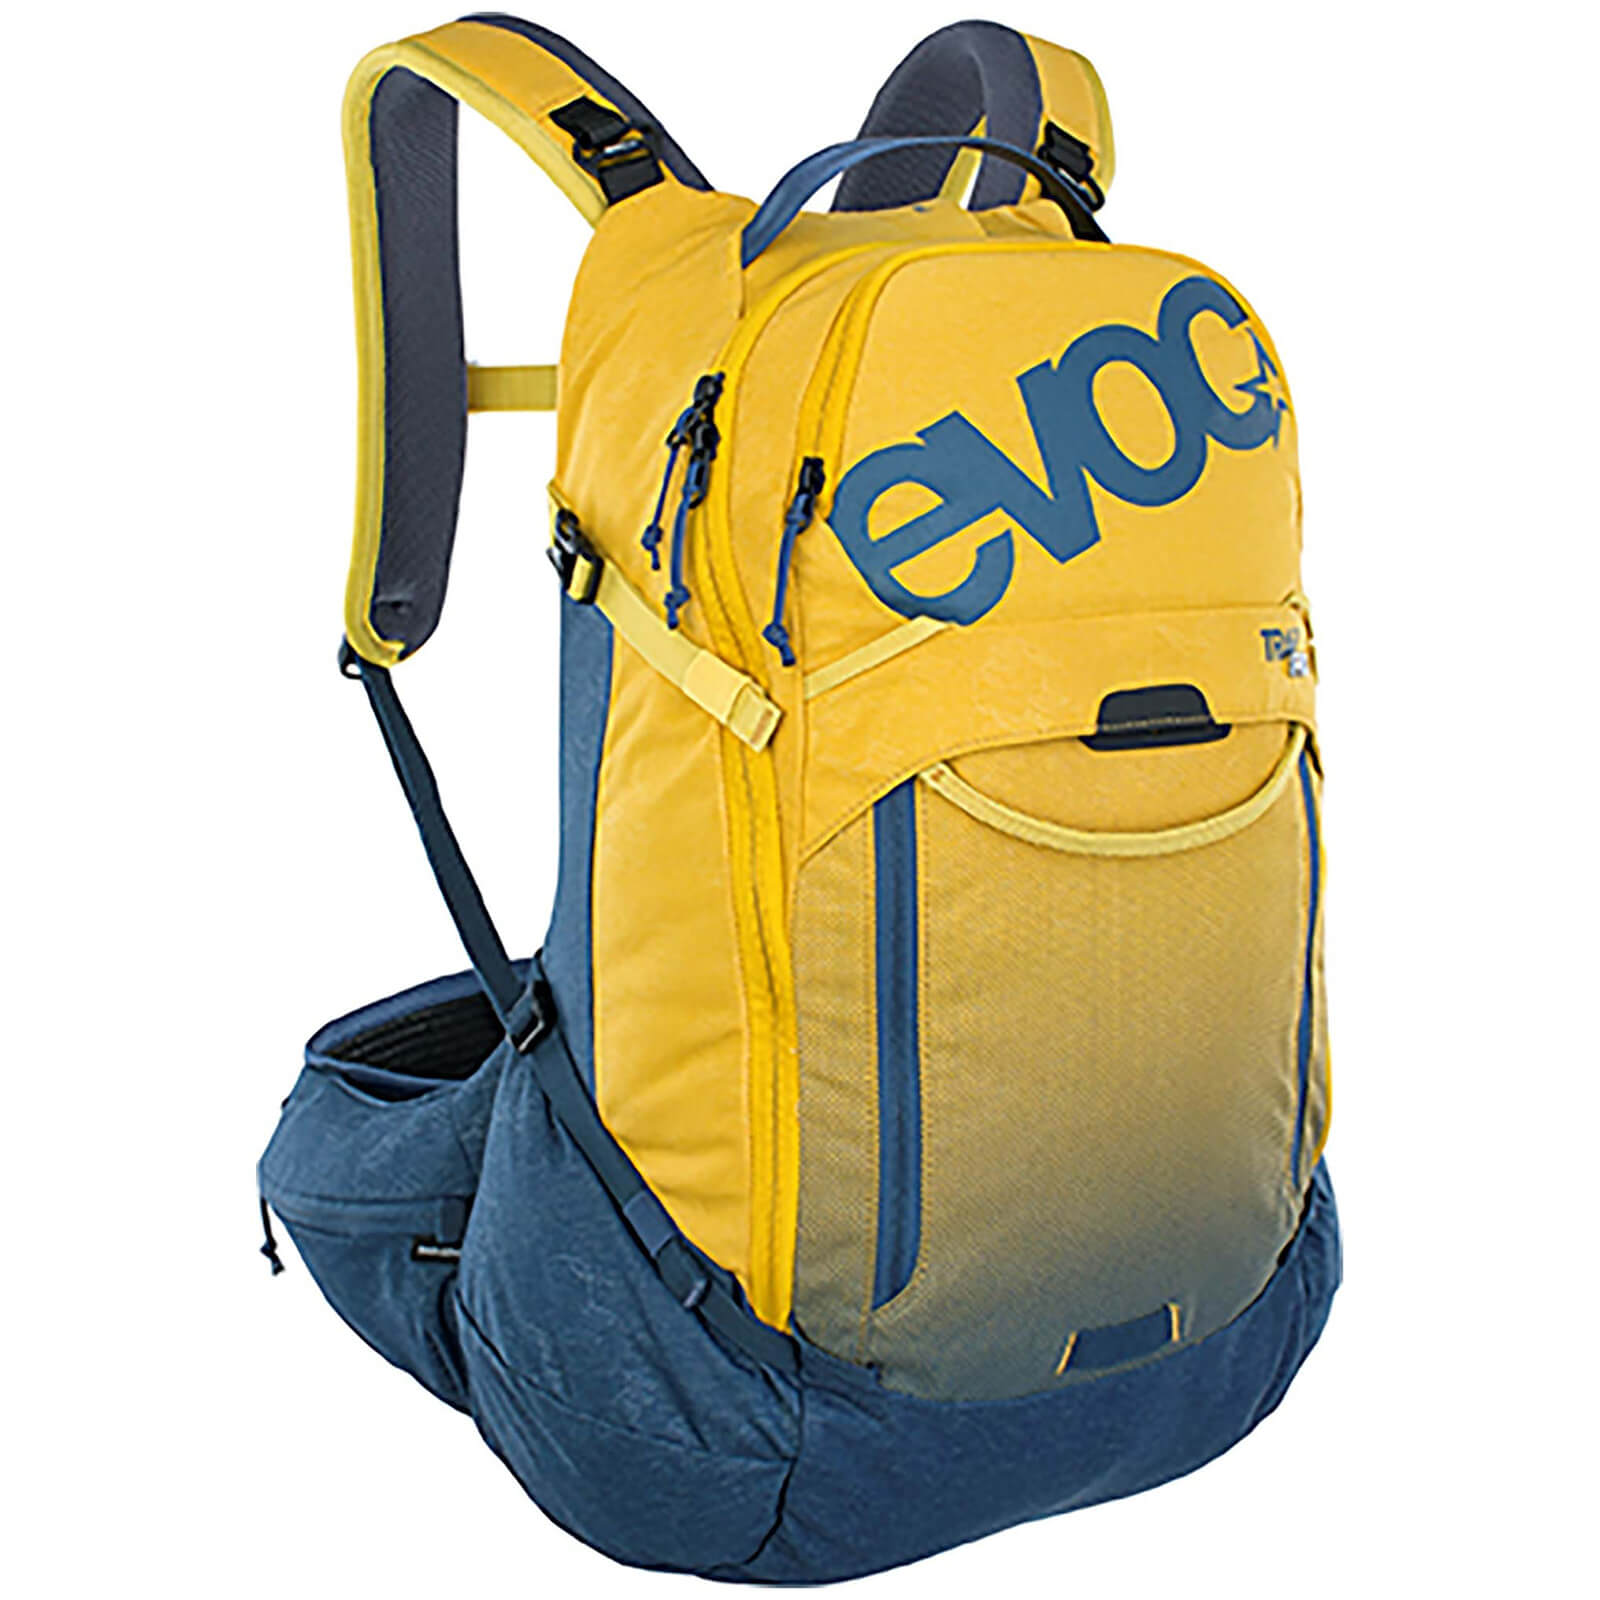 Evoc Trail Pro Protector 26L Backpack - S/M - Curry/Denim